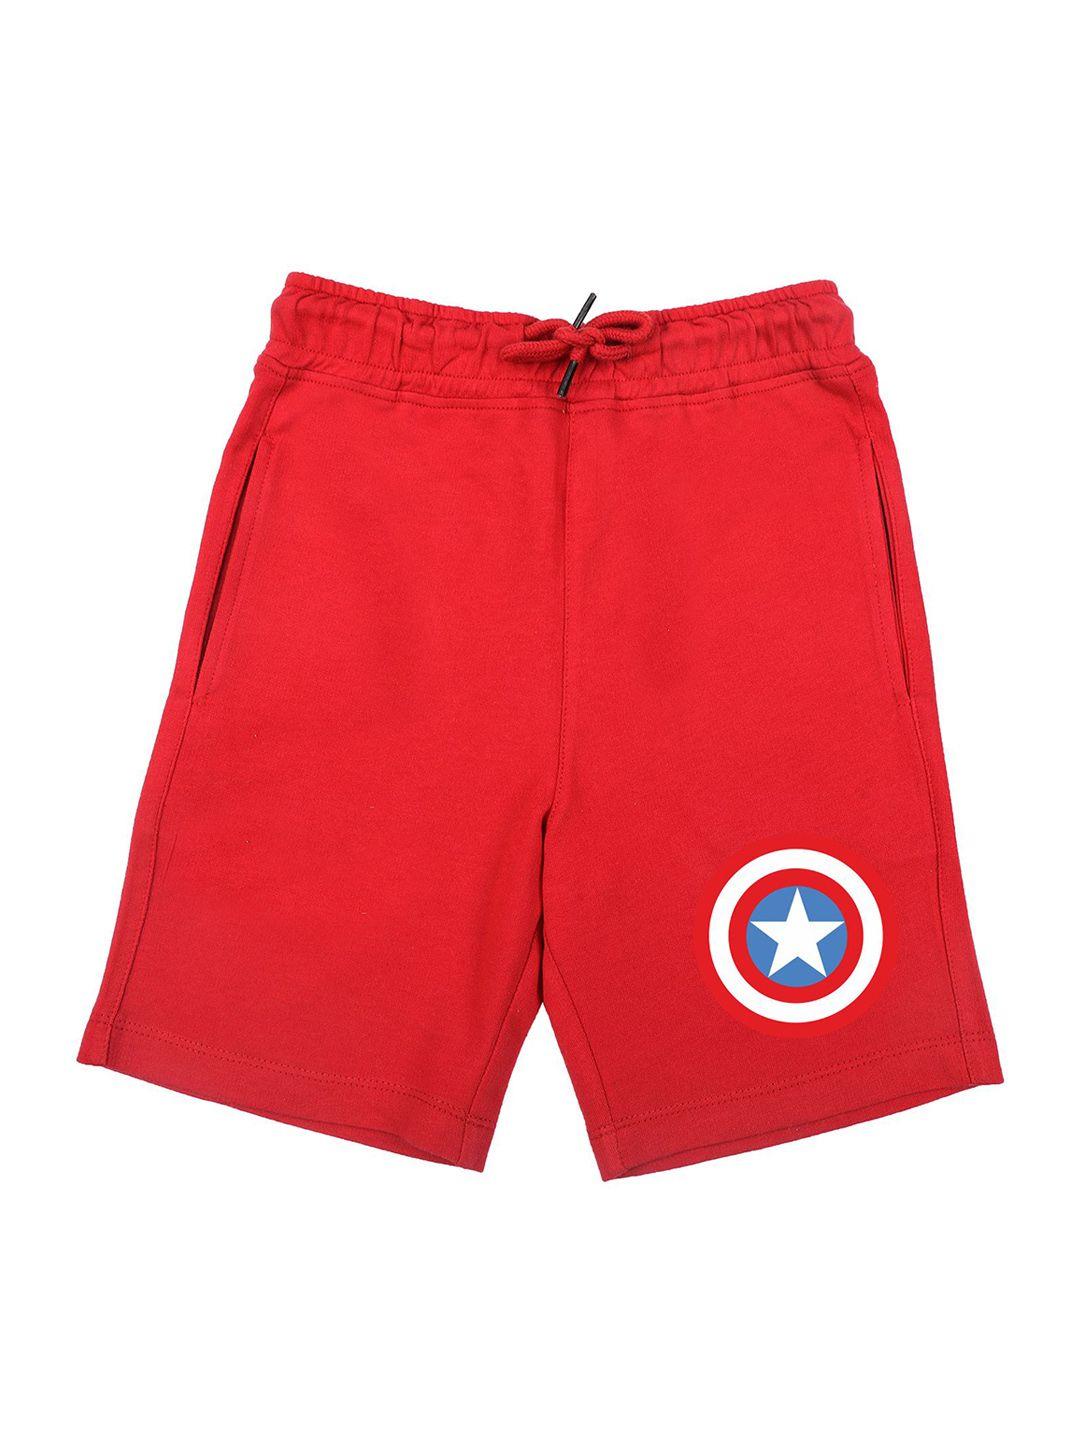 marvel-by-wear-your-mind-boys-red-graphic-print-shorts